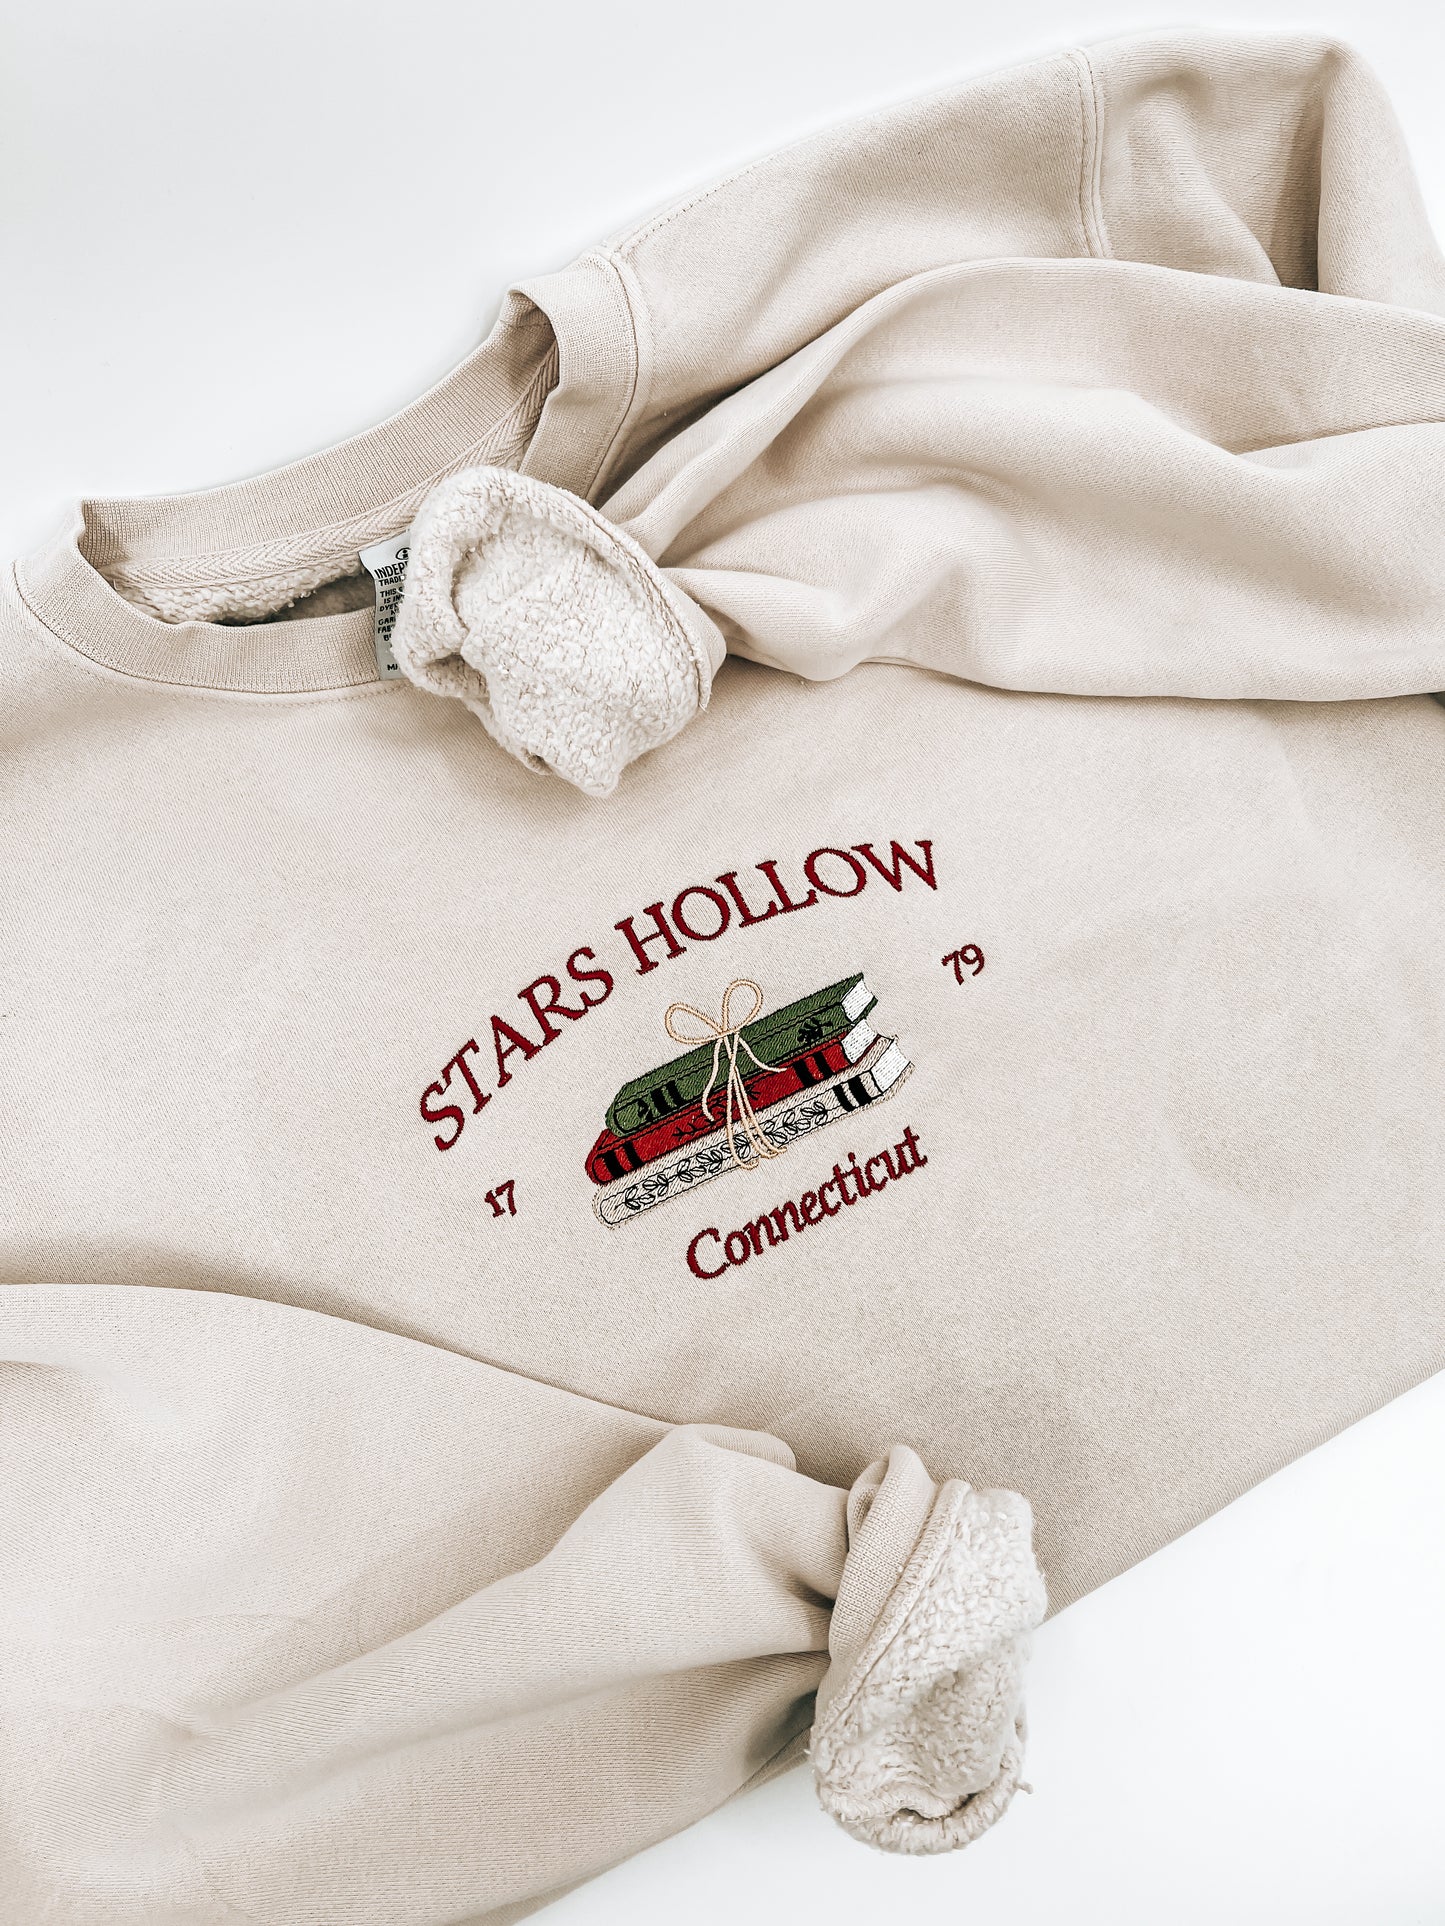 Stars Hollow Embroidered Crewneck